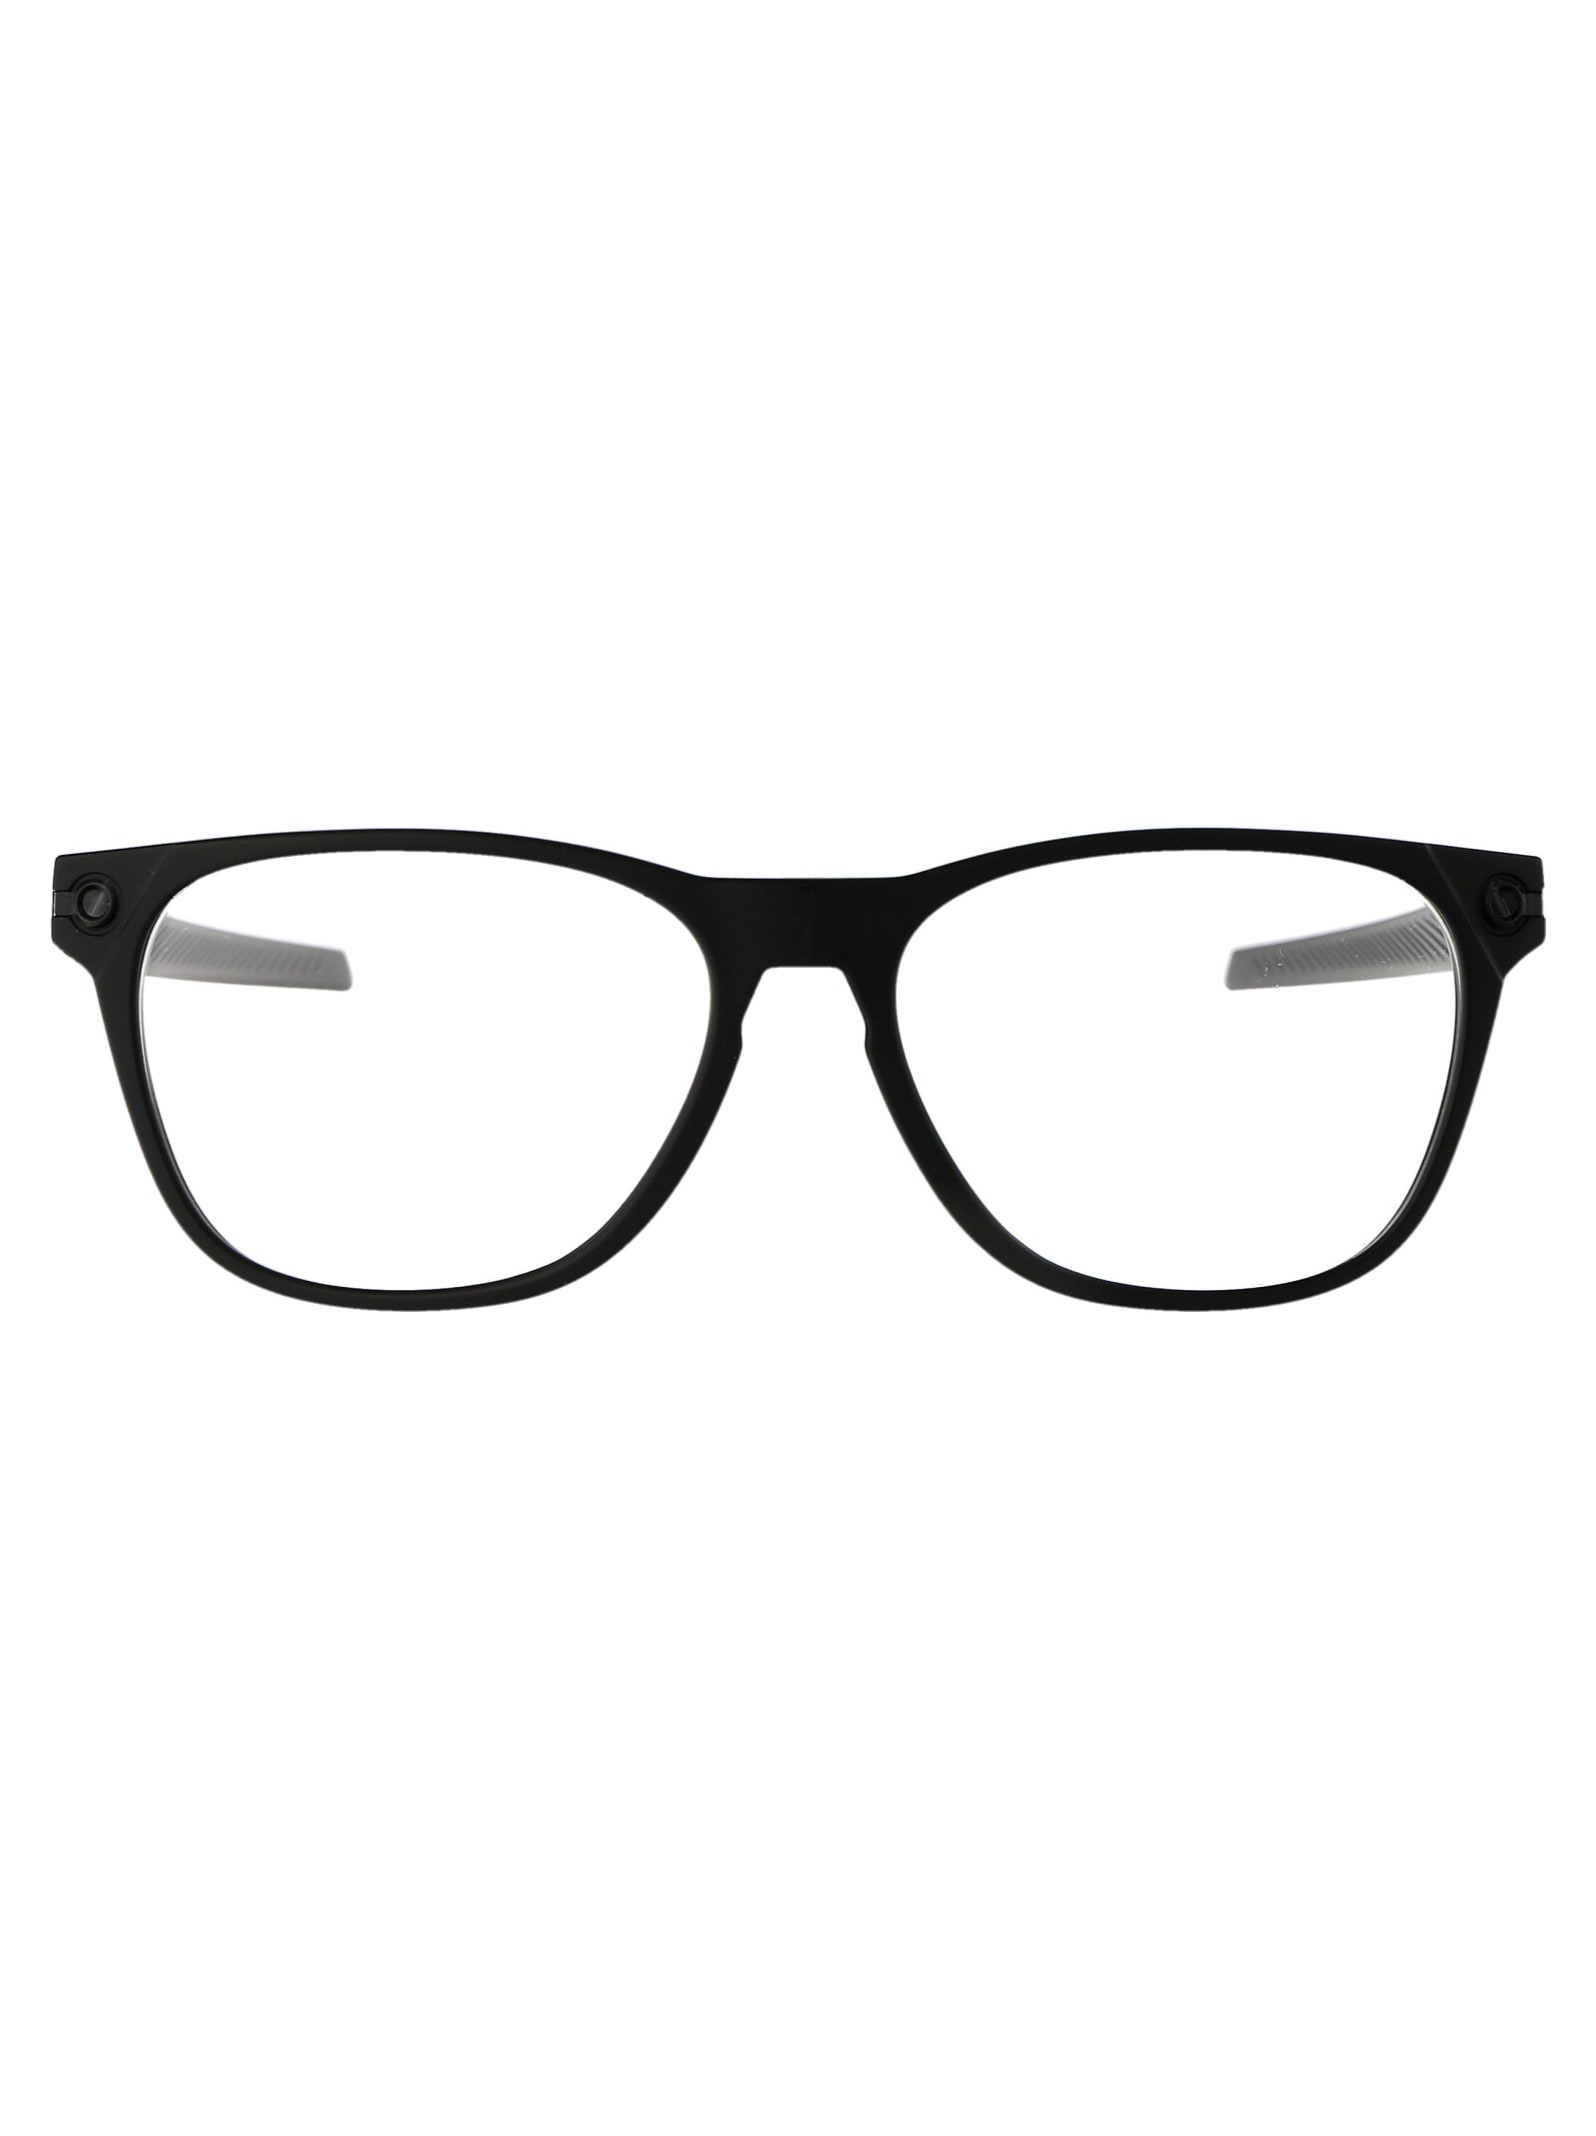 Ojector Rx Glasses